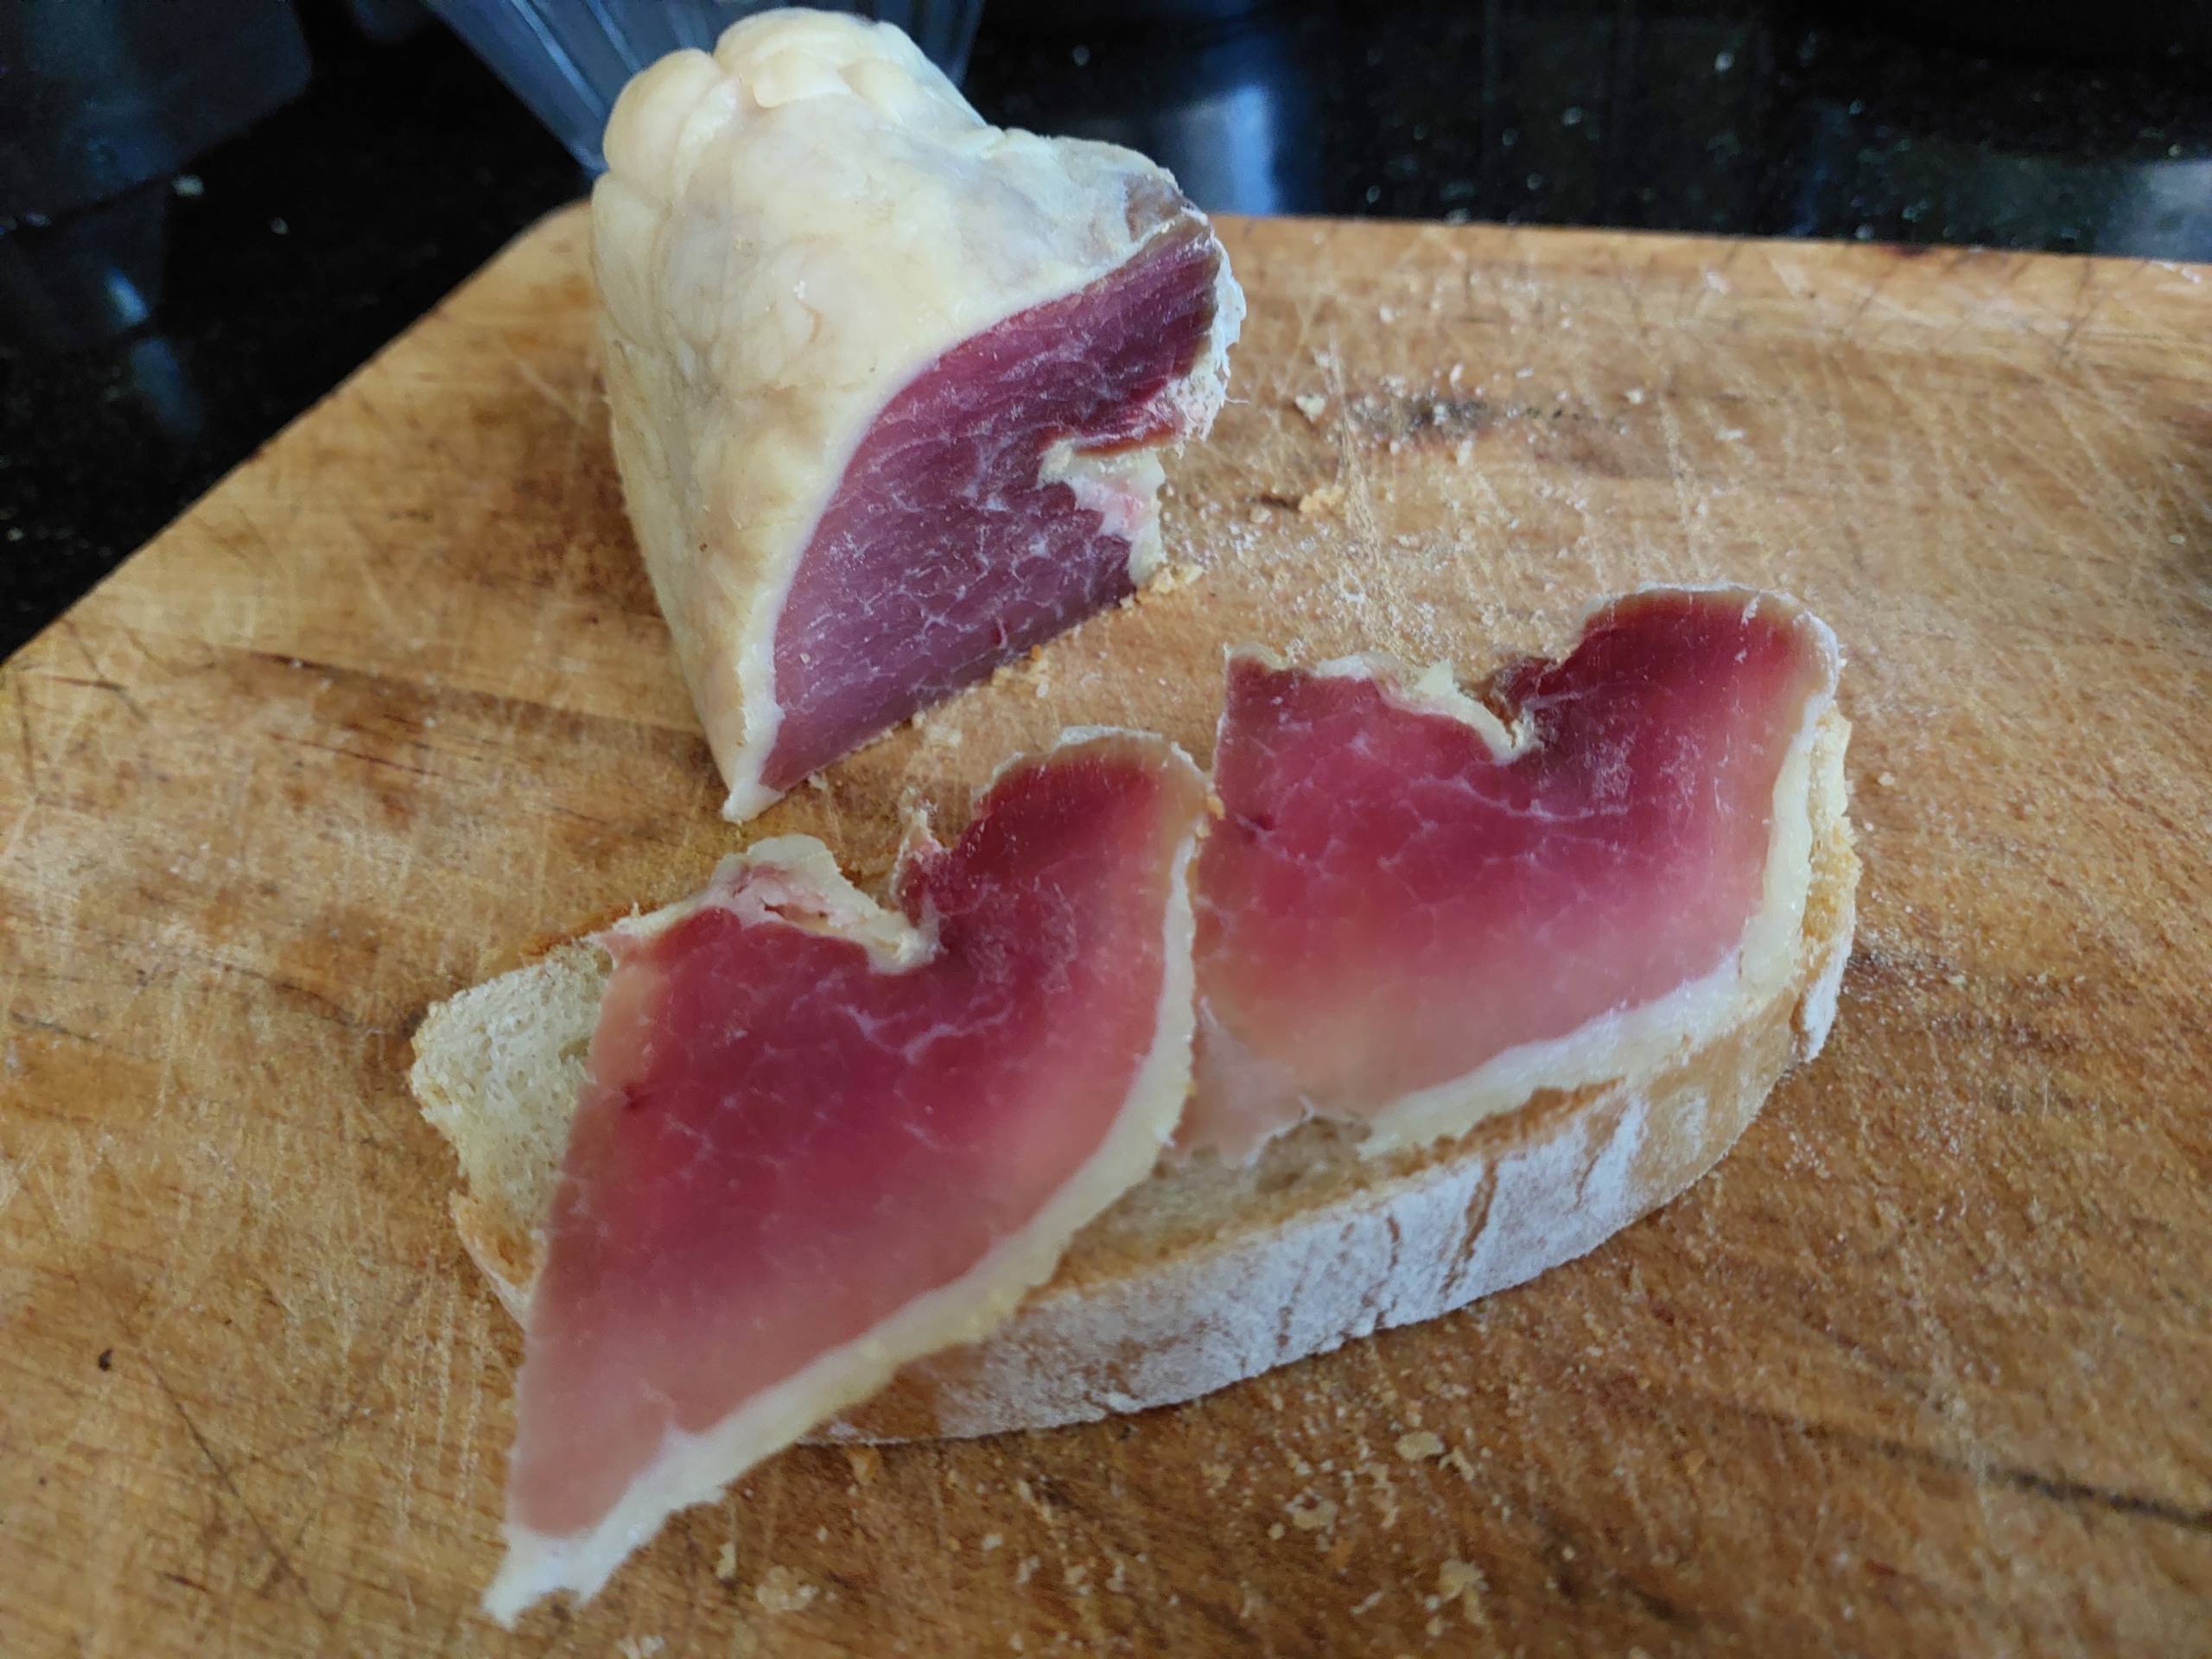 How No Salt Ciabatta and Slightly Salty Jamon Complement Each Other